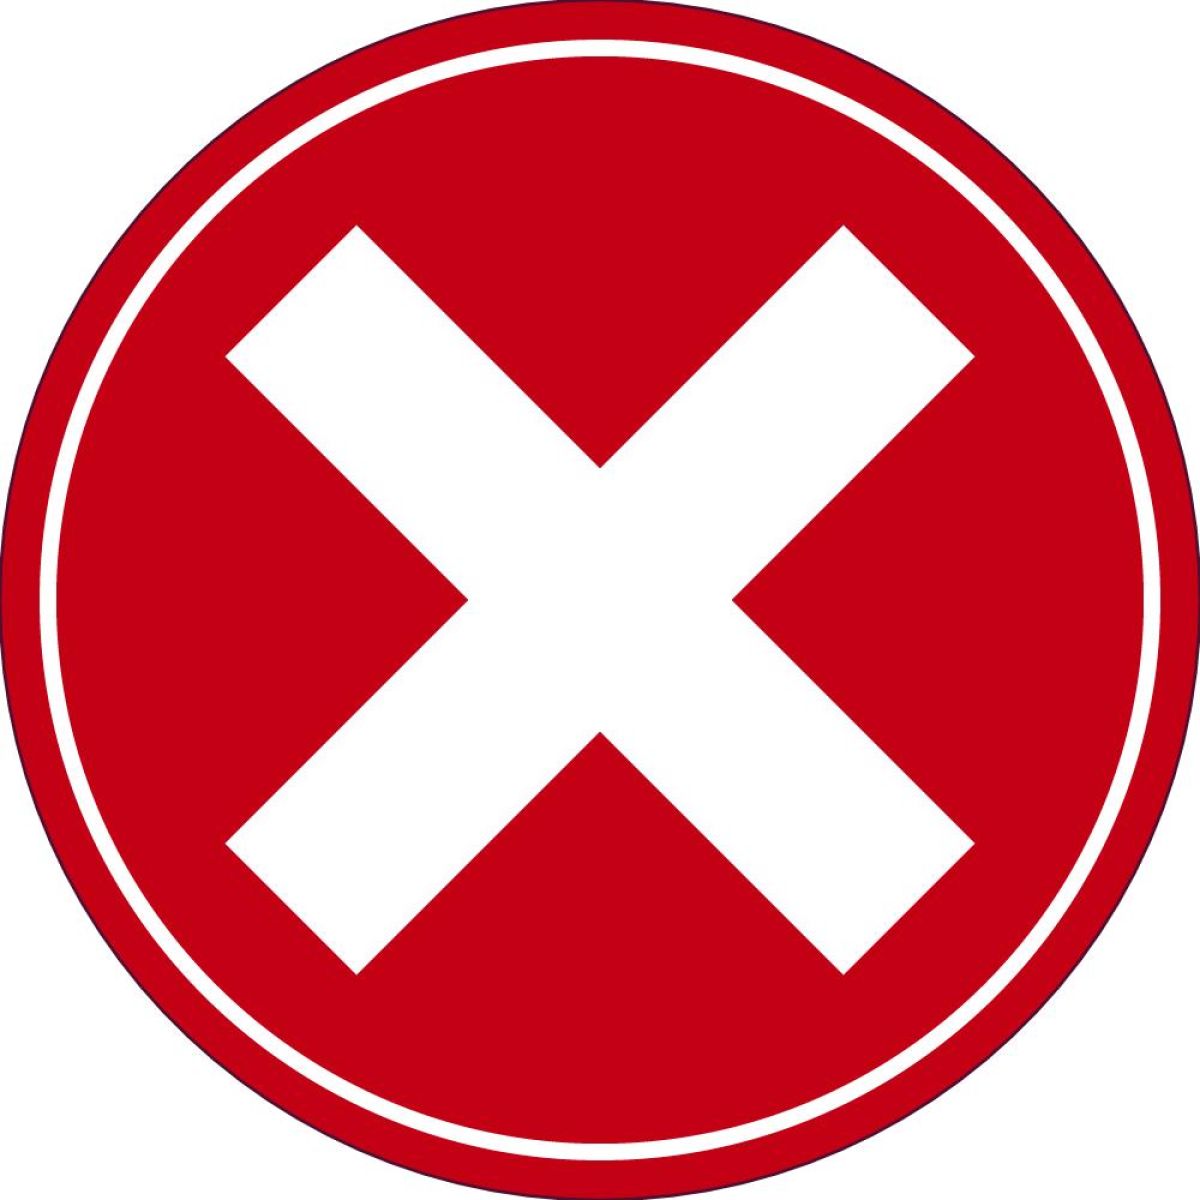 GRAPHIC, RED "X"